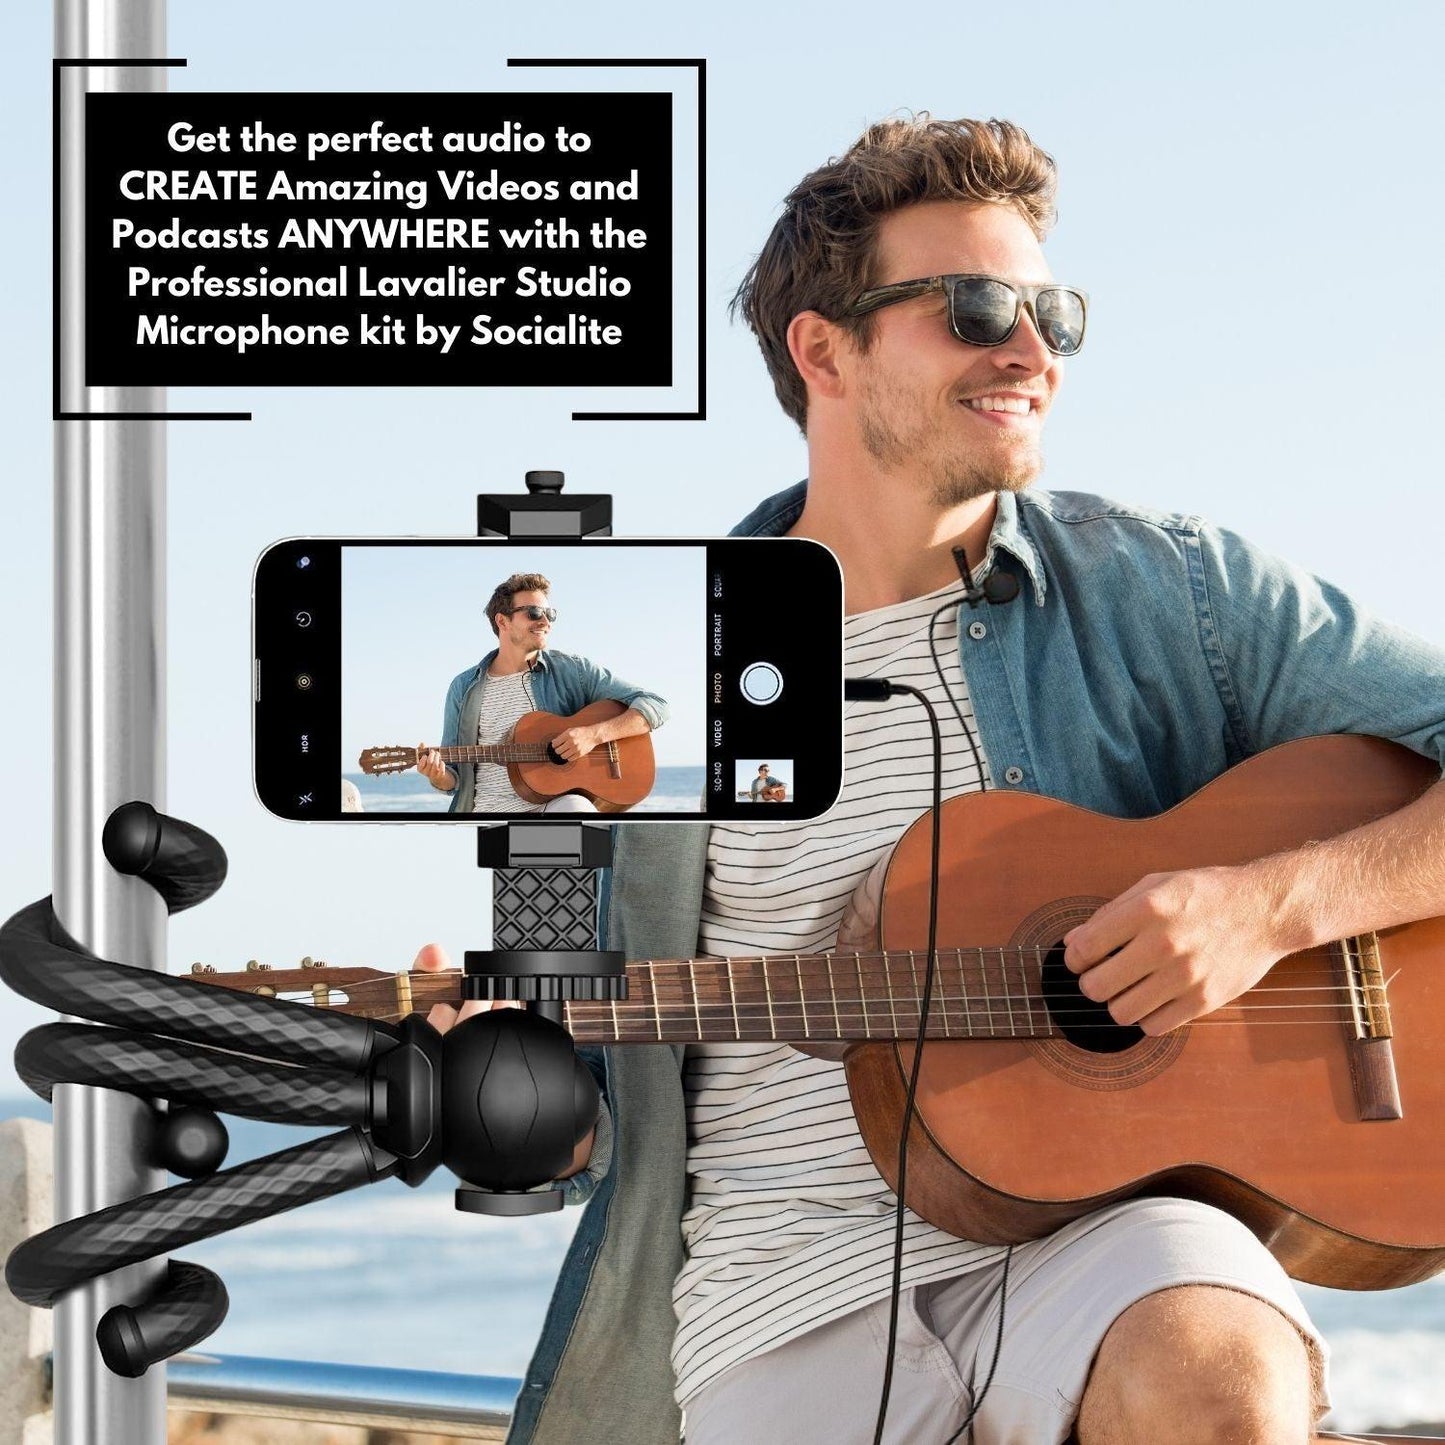 Guitarist man filming and recording his music using socialite lavalier microphone